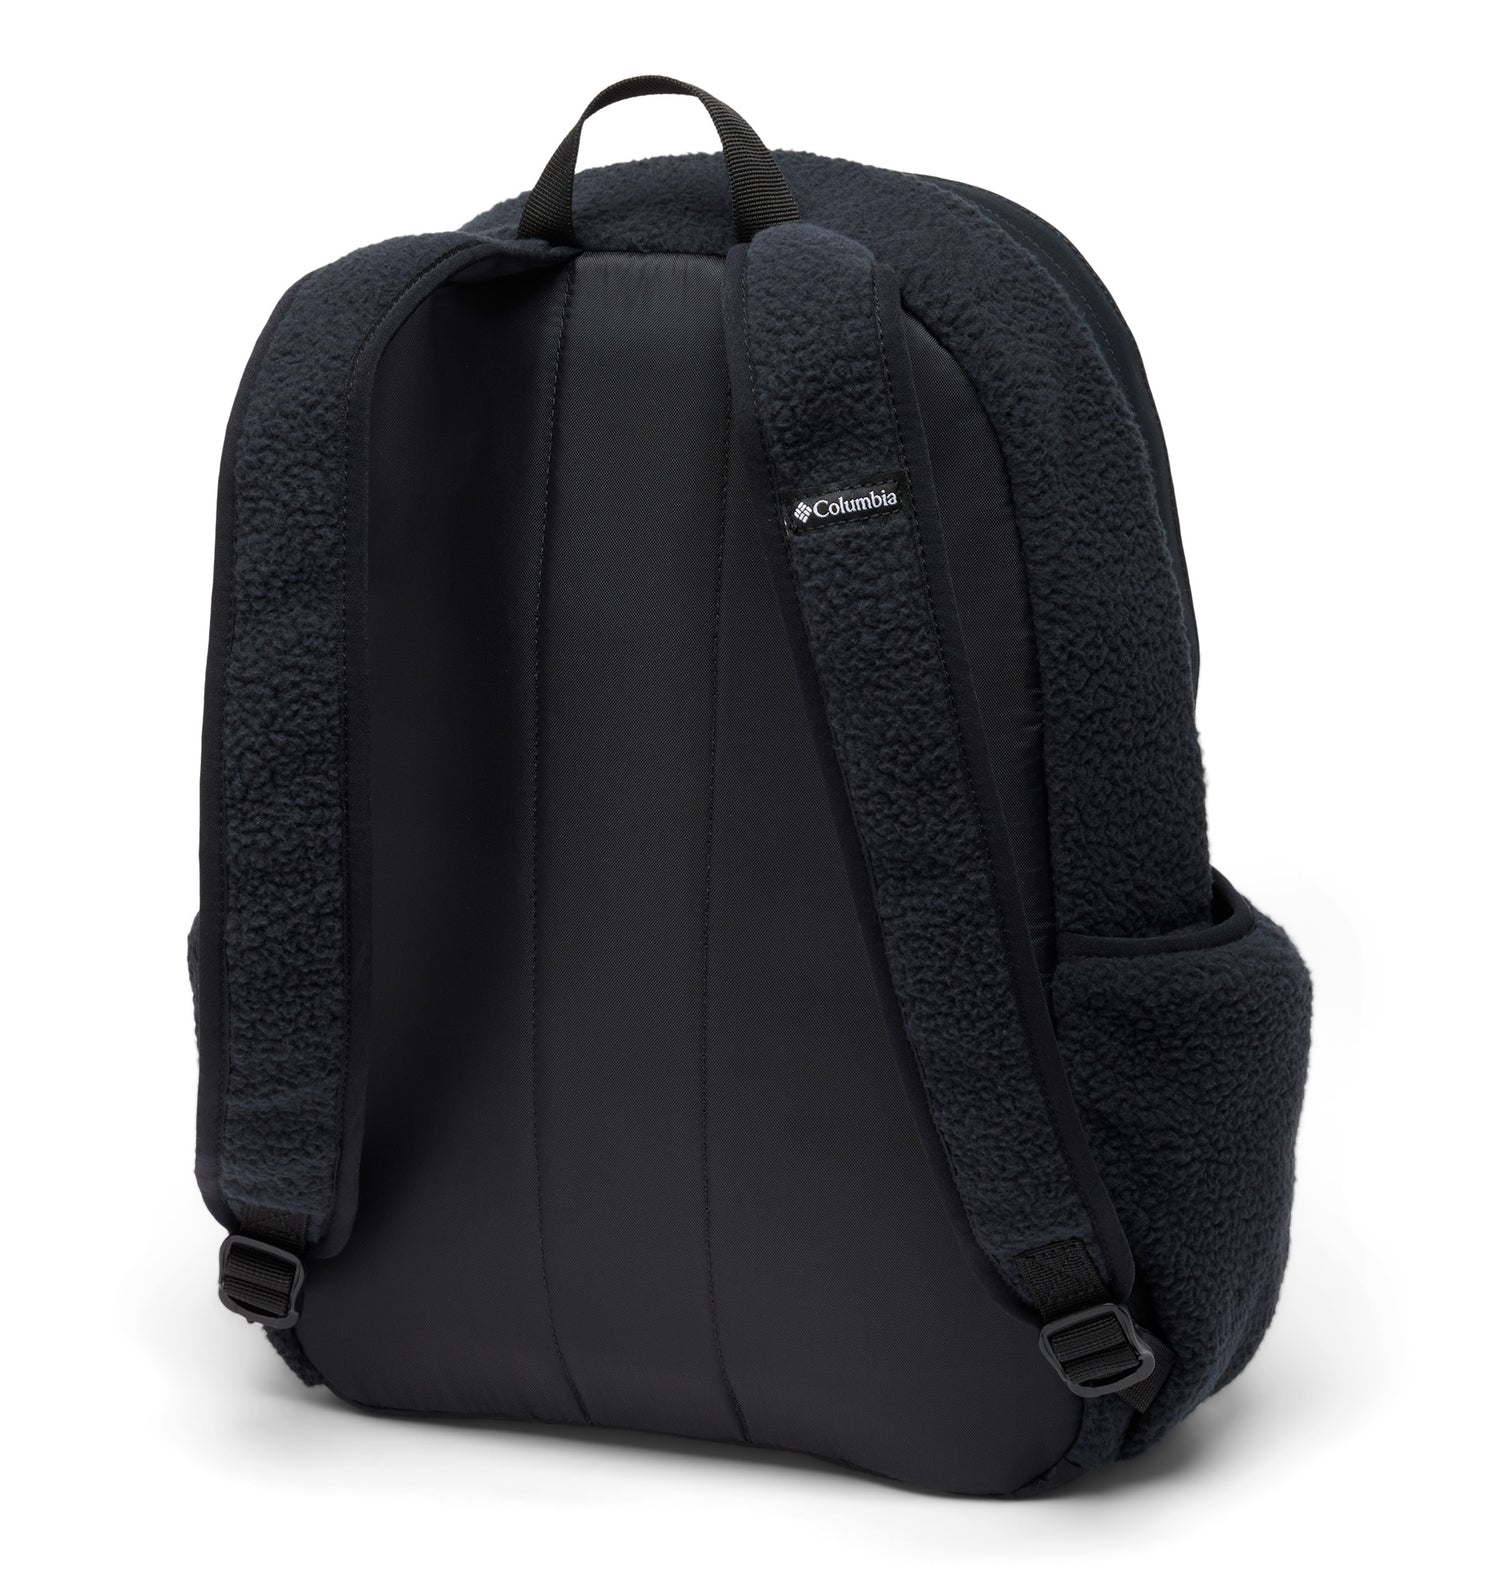 Back side of a black backpack called Helvetia designed by Columbia showing its fleece texture, straps, top handle, and one side pocket.